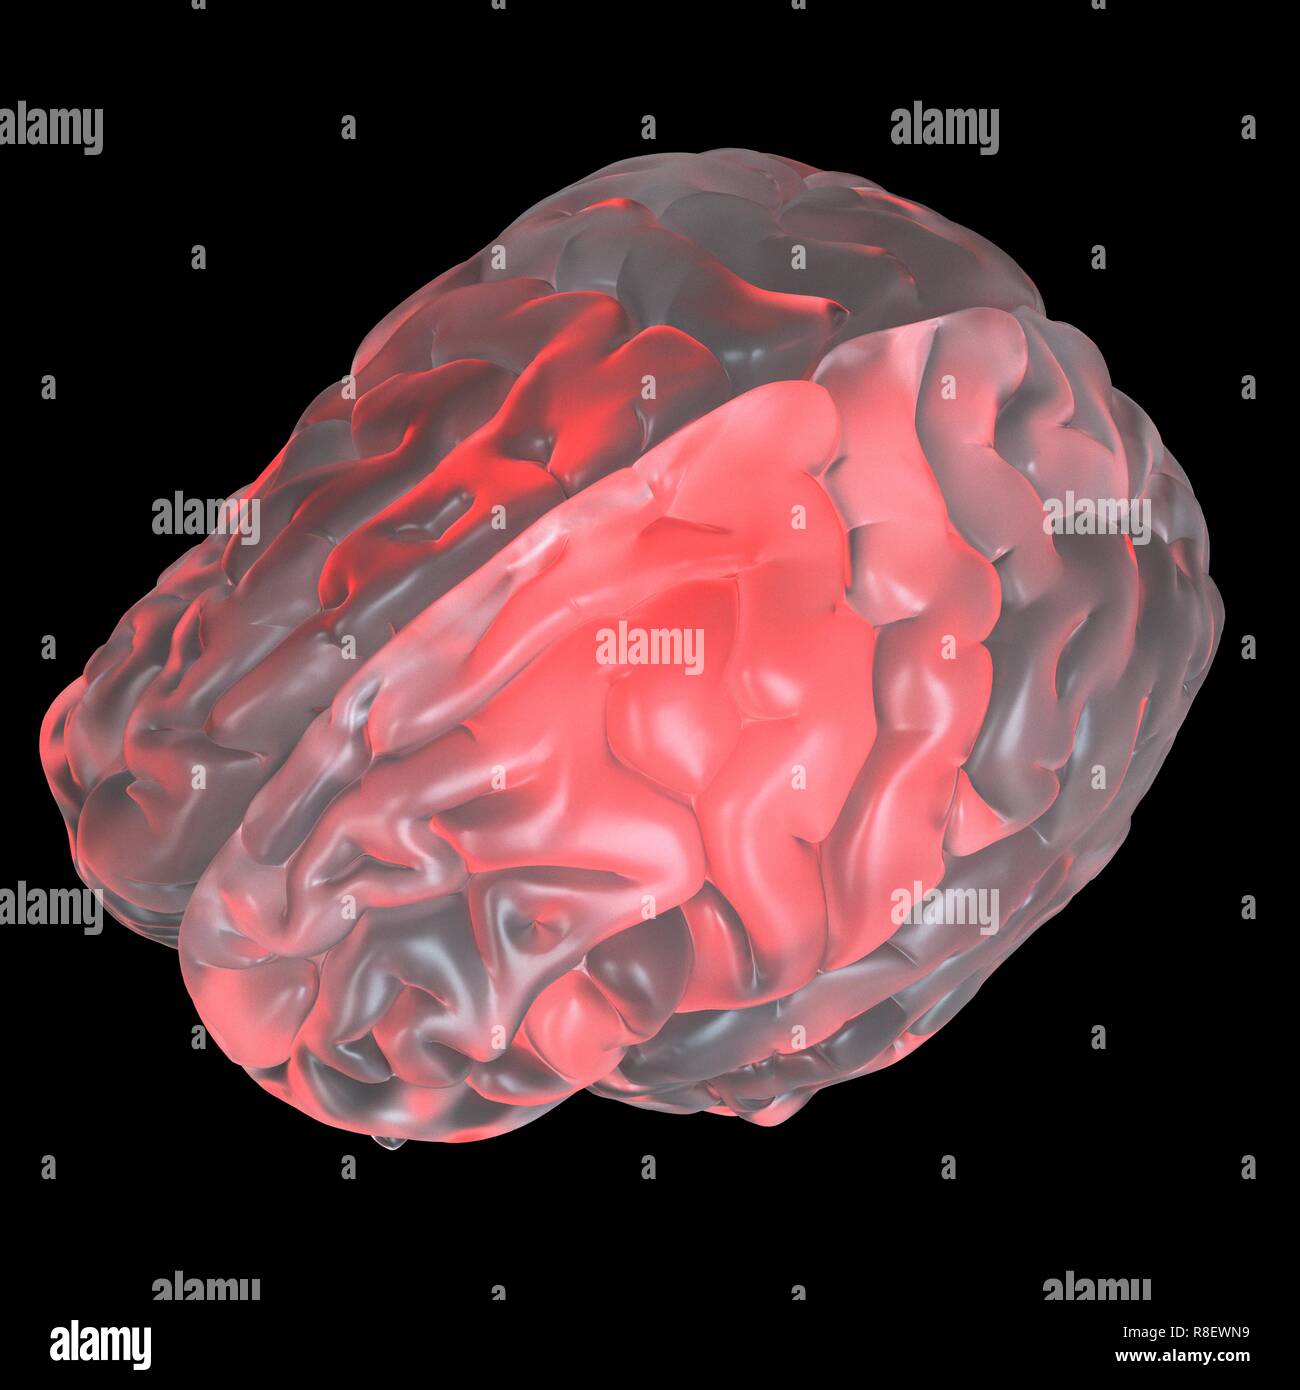 Illustration of a red glowing glass brain. Stock Photo